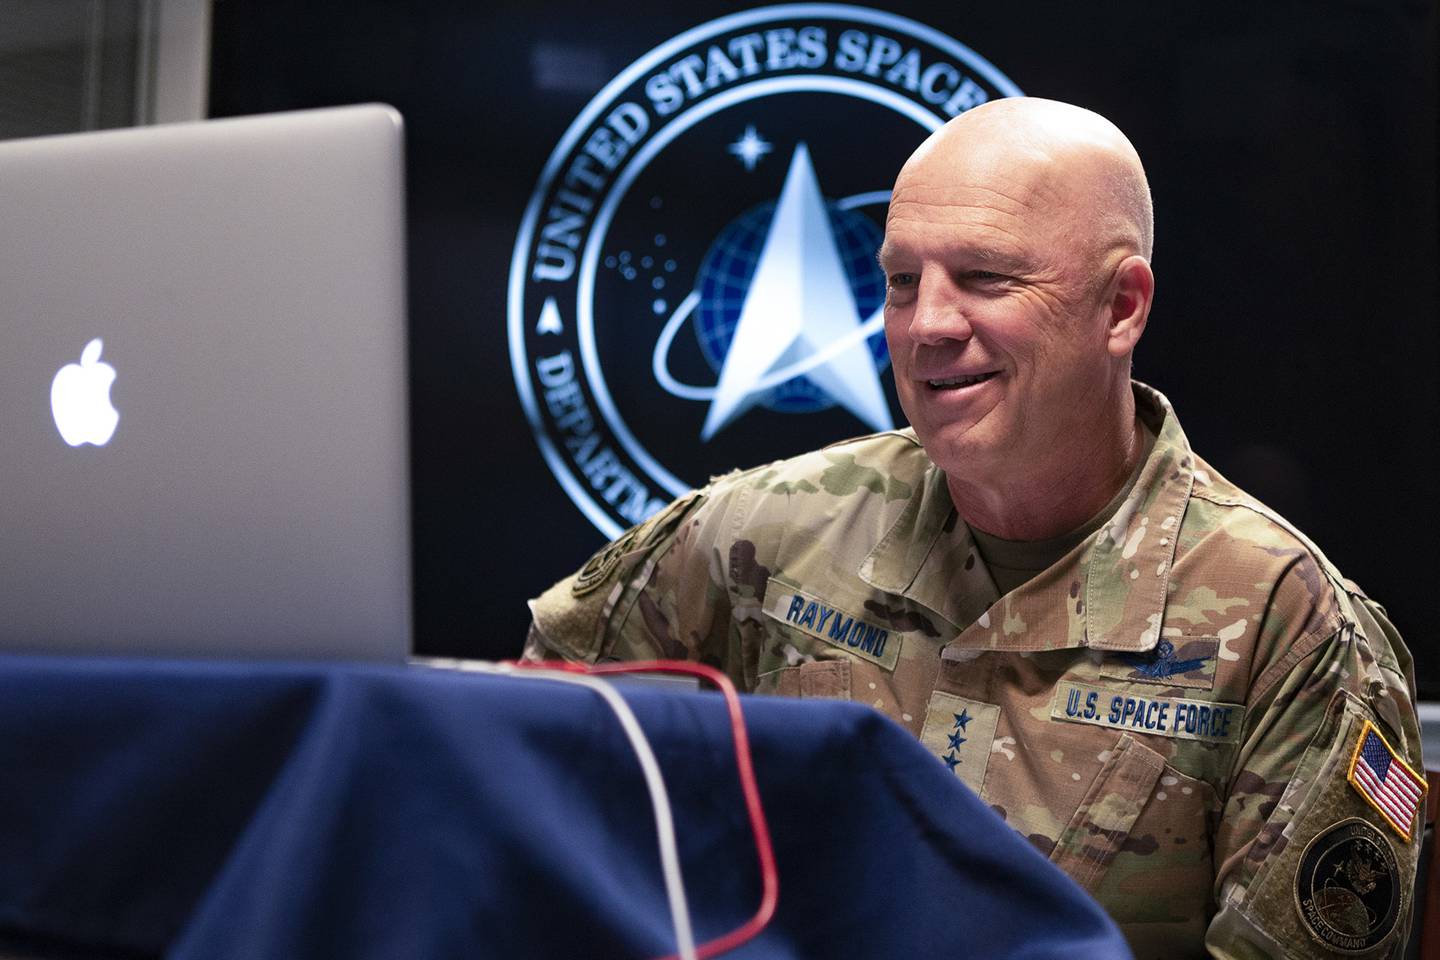 U.S. Space Force's chief of space operations, Air Force Gen. John W. Raymond, participates in a virtual fireside chat with the Center for a New American Security while at the Pentagon on July 24, 2020.